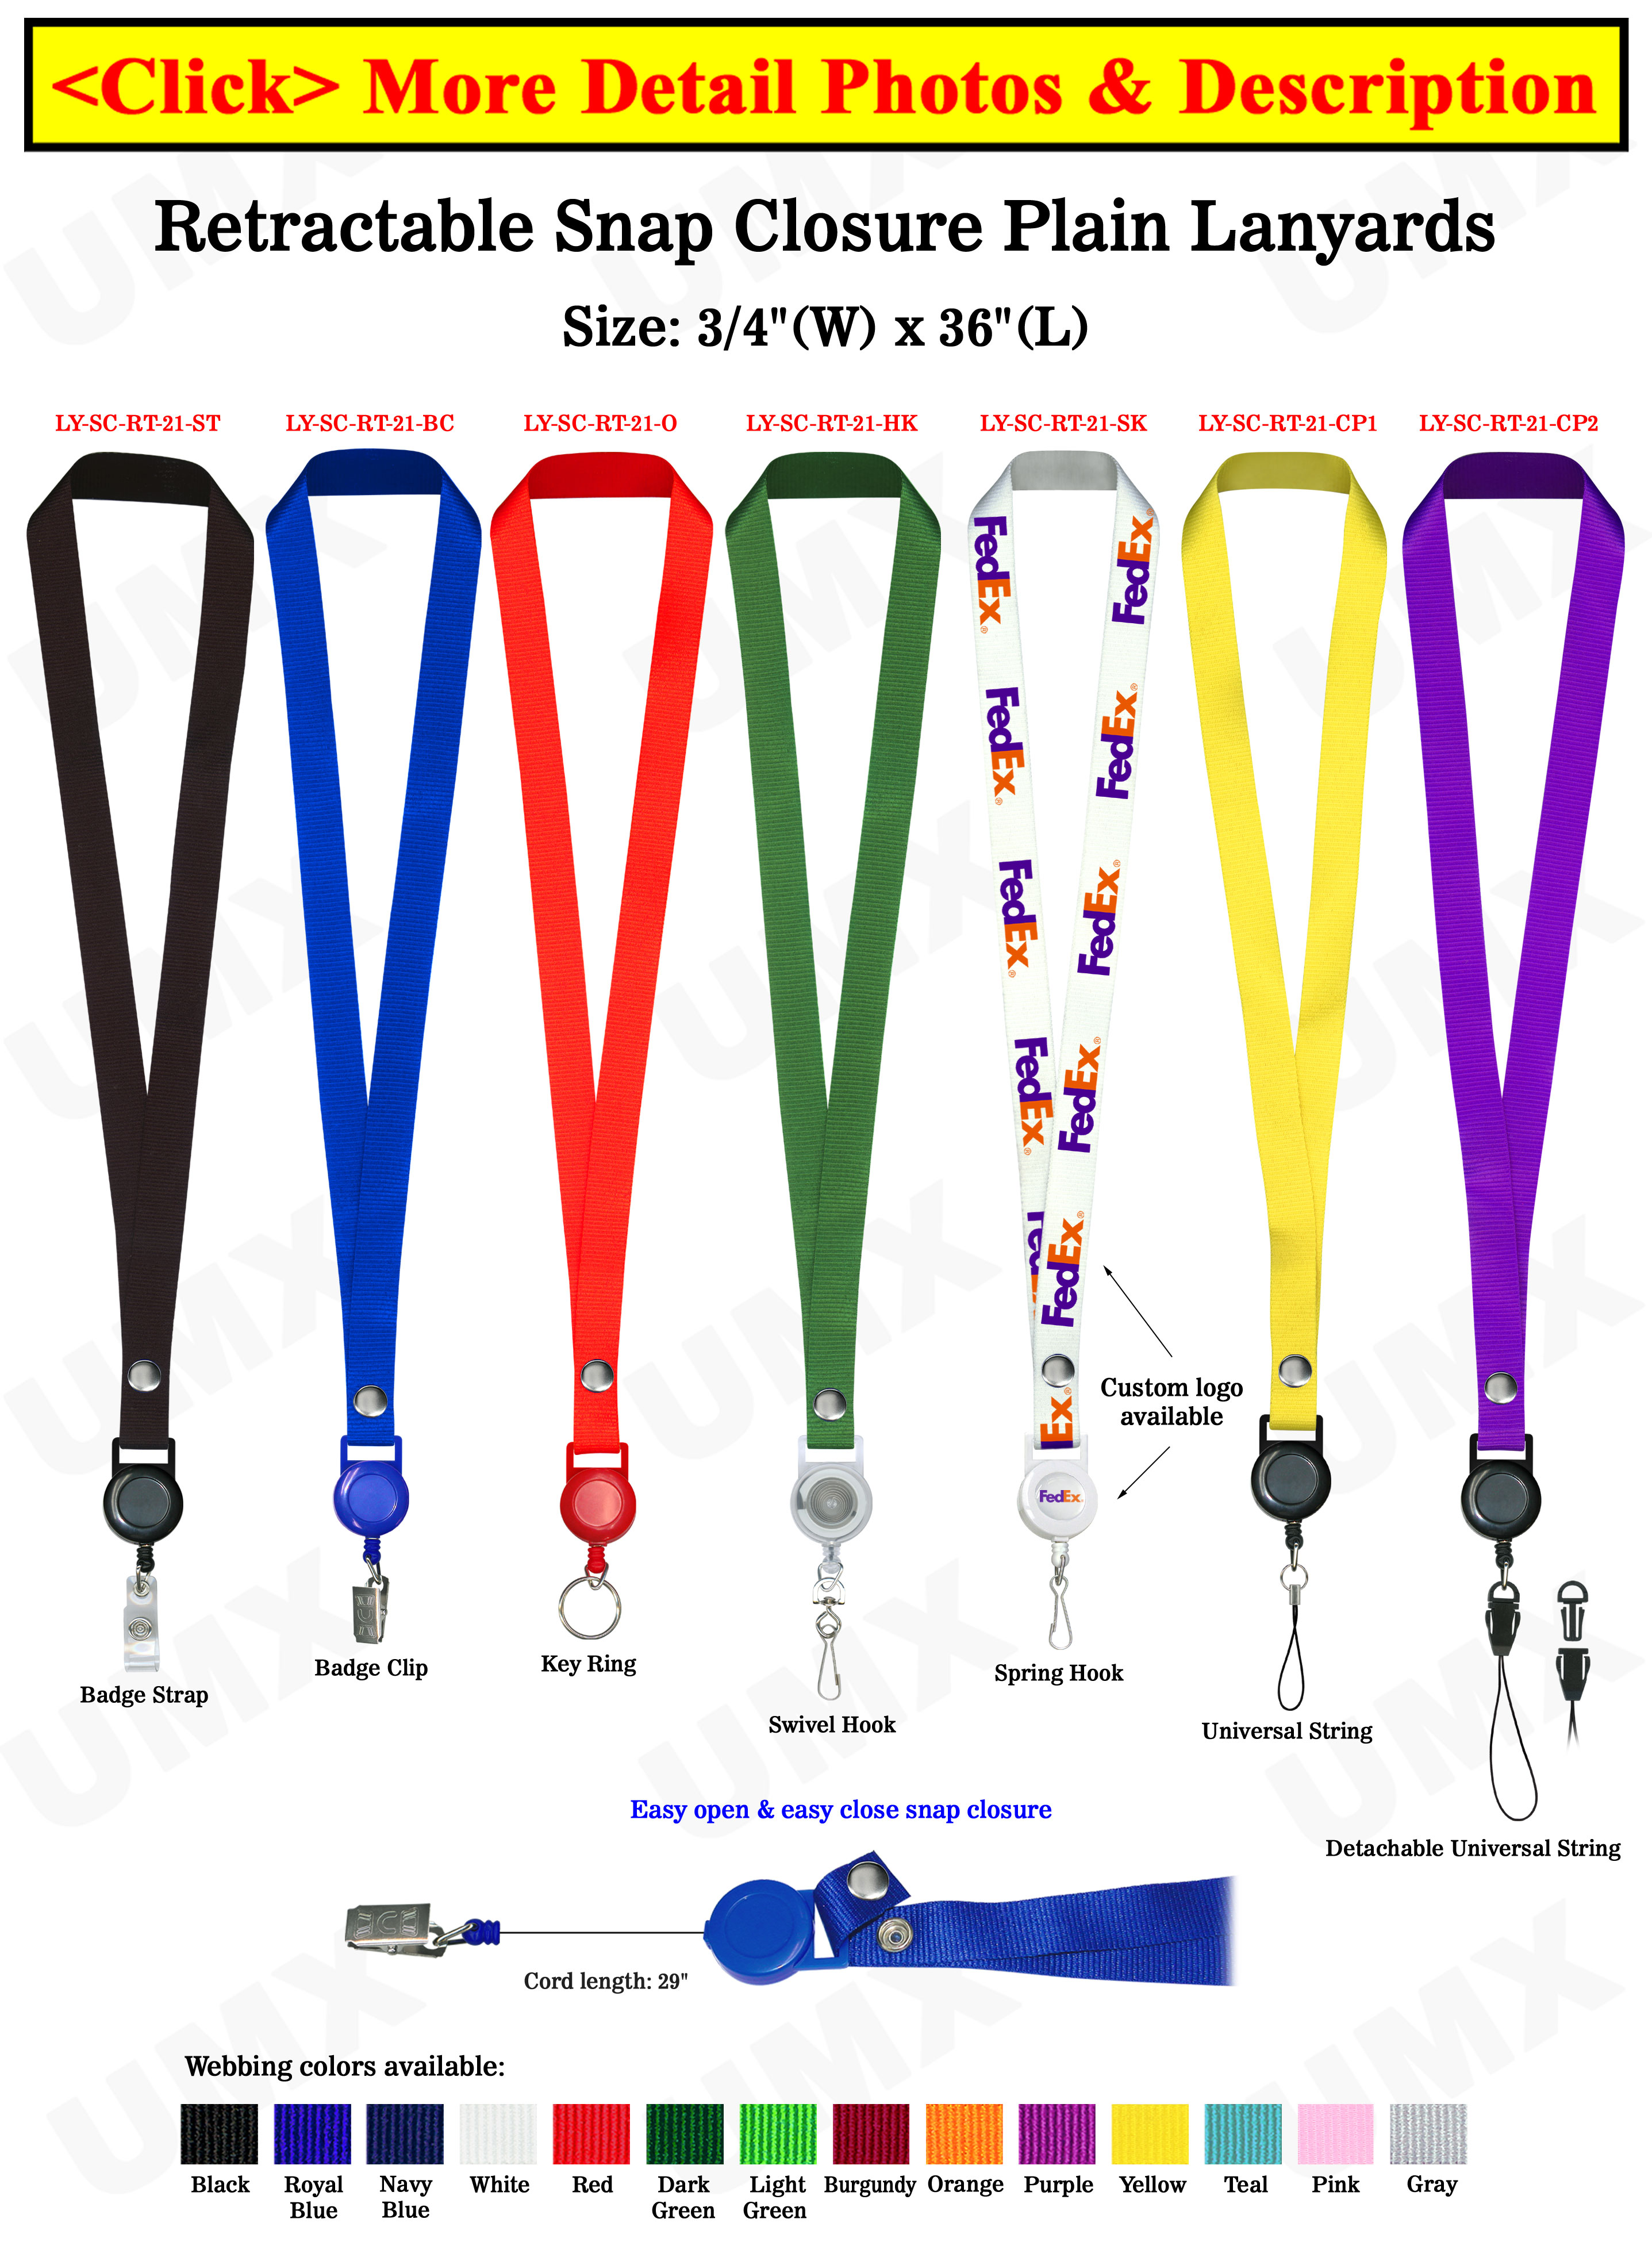 Retractable Name Holder Lanyards: with 3/4 Snap Closure Plain